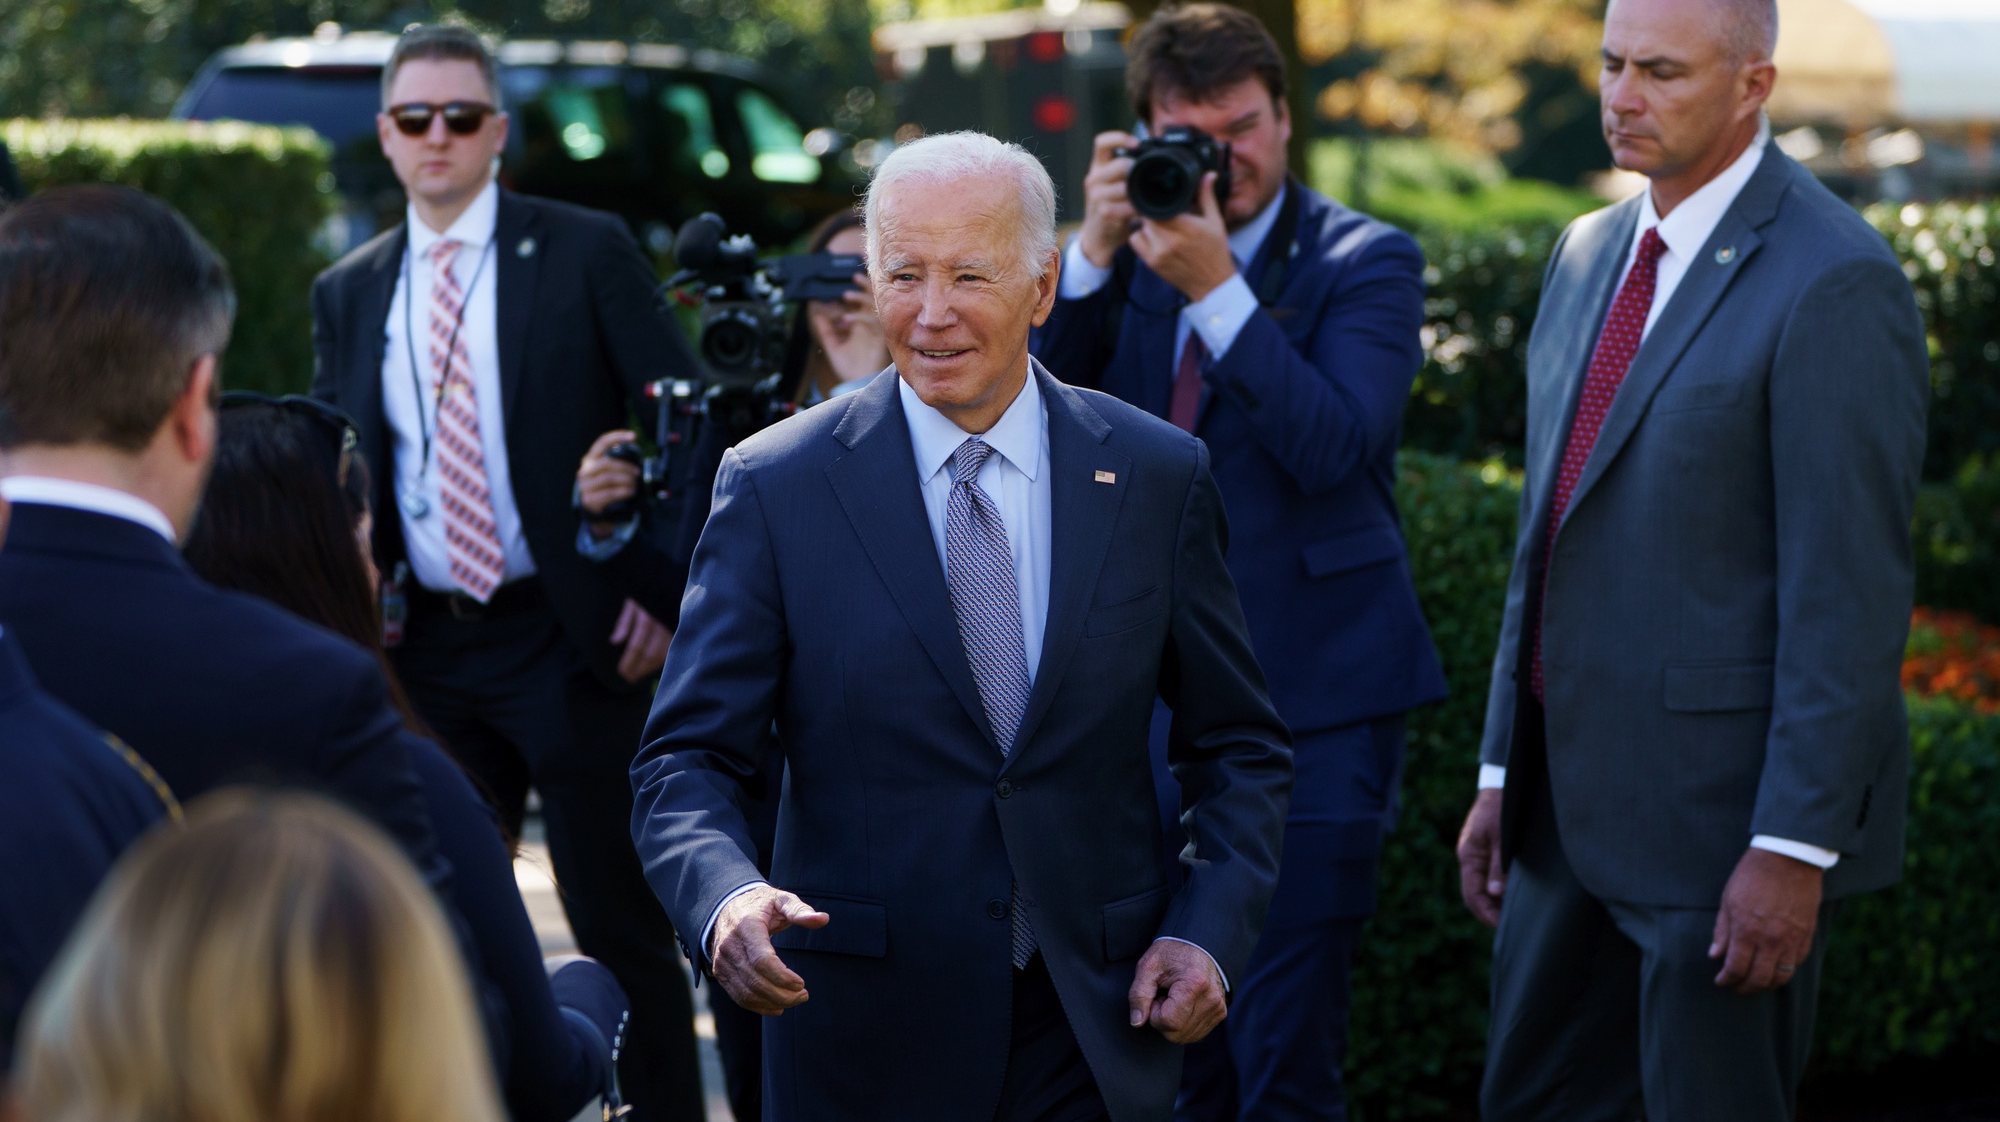 epa10913620 US President Joe Biden (C) greets visitors after delivering remarks on consumer protections in the Rose Garden of the White House in Washington, DC, USA, 11 October 2023. President Biden announced new measures targeted against hidden junk fees affecting consumers.  EPA/WILL OLIVER